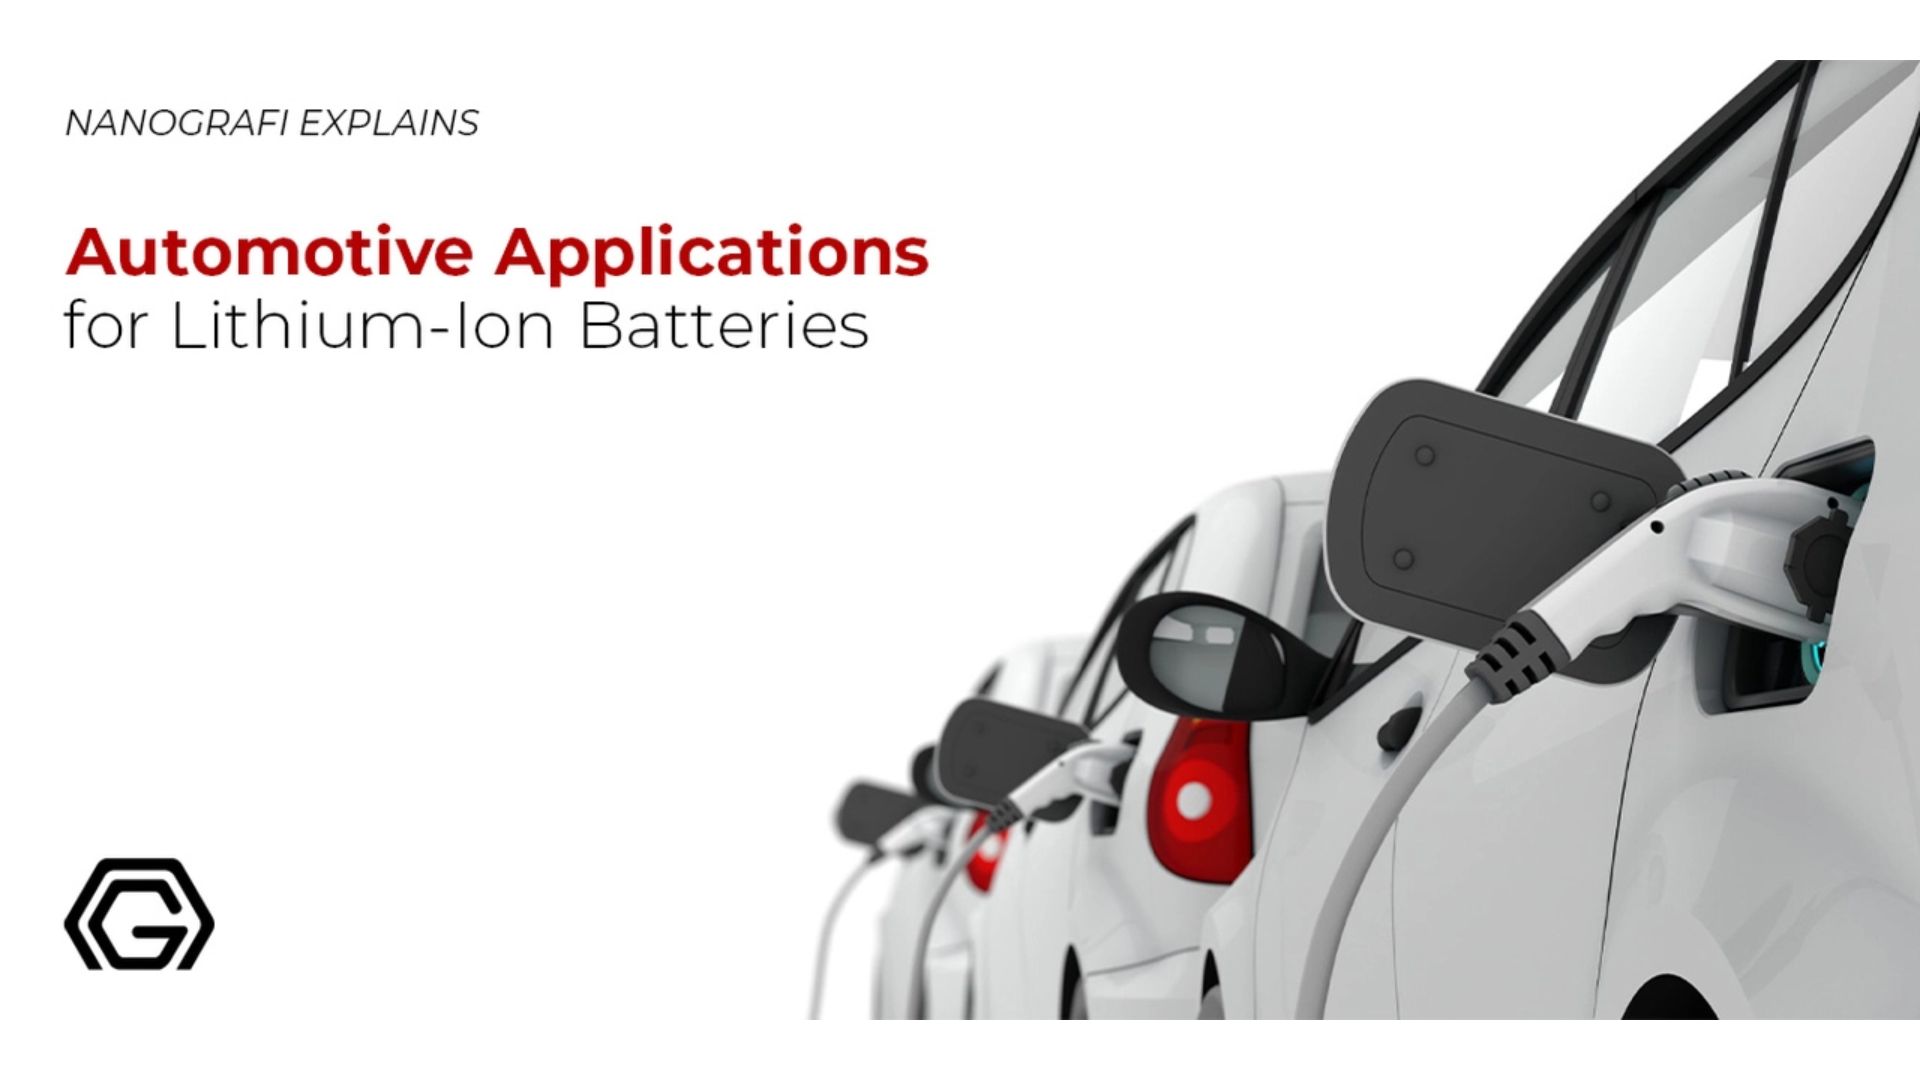 Automotive applications for lithium-Ion batteries